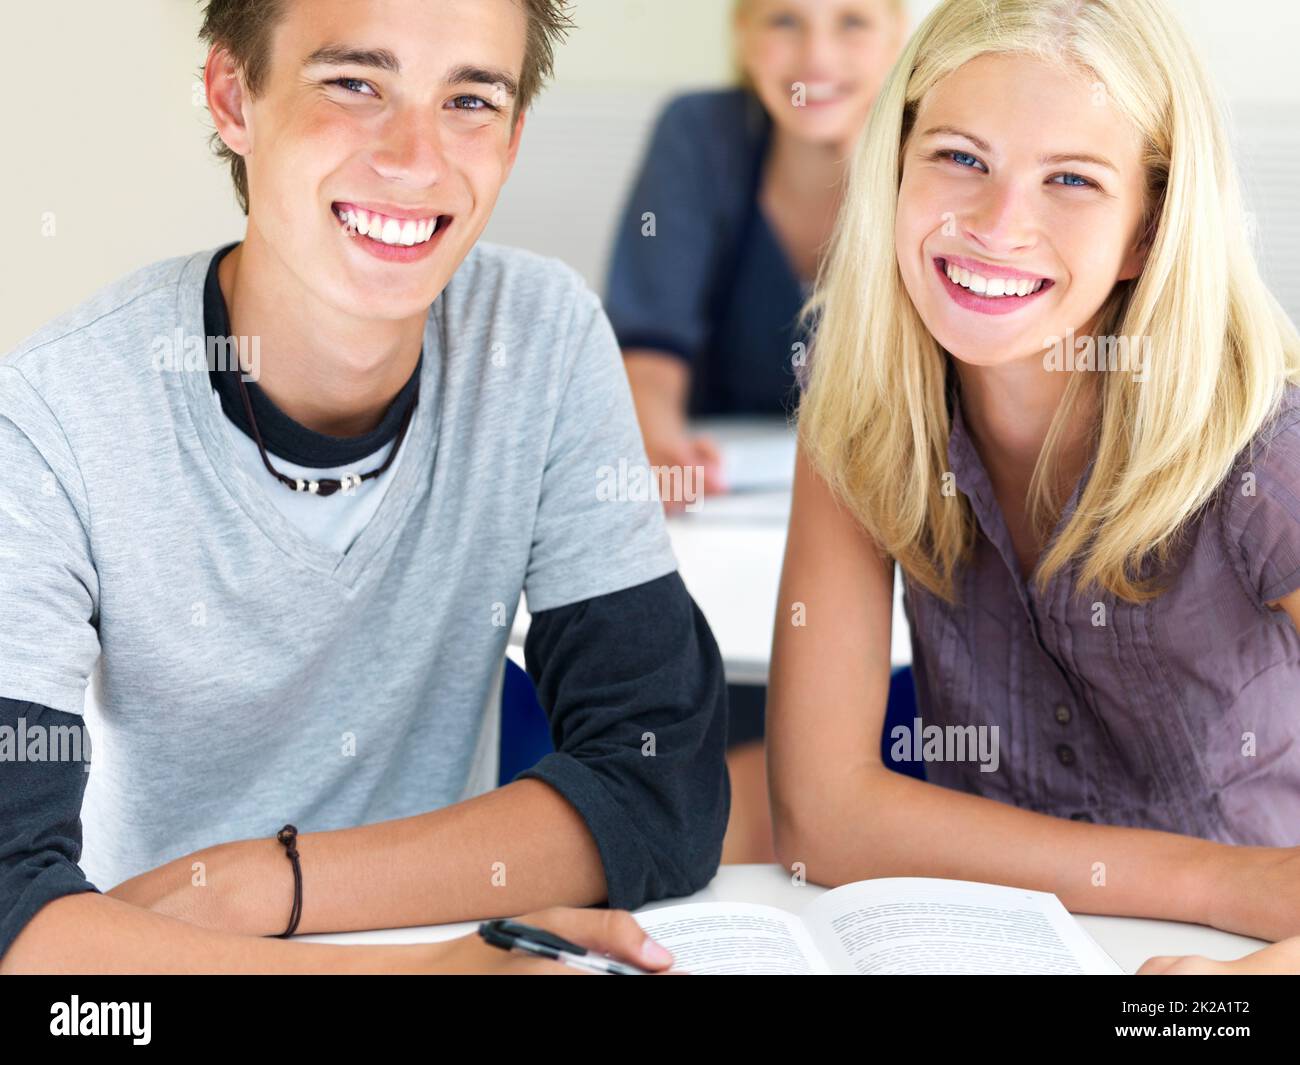 Young boy and girl sitting together in class. Closeup of happy young boys and girls sitting together in class with notes. Stock Photo